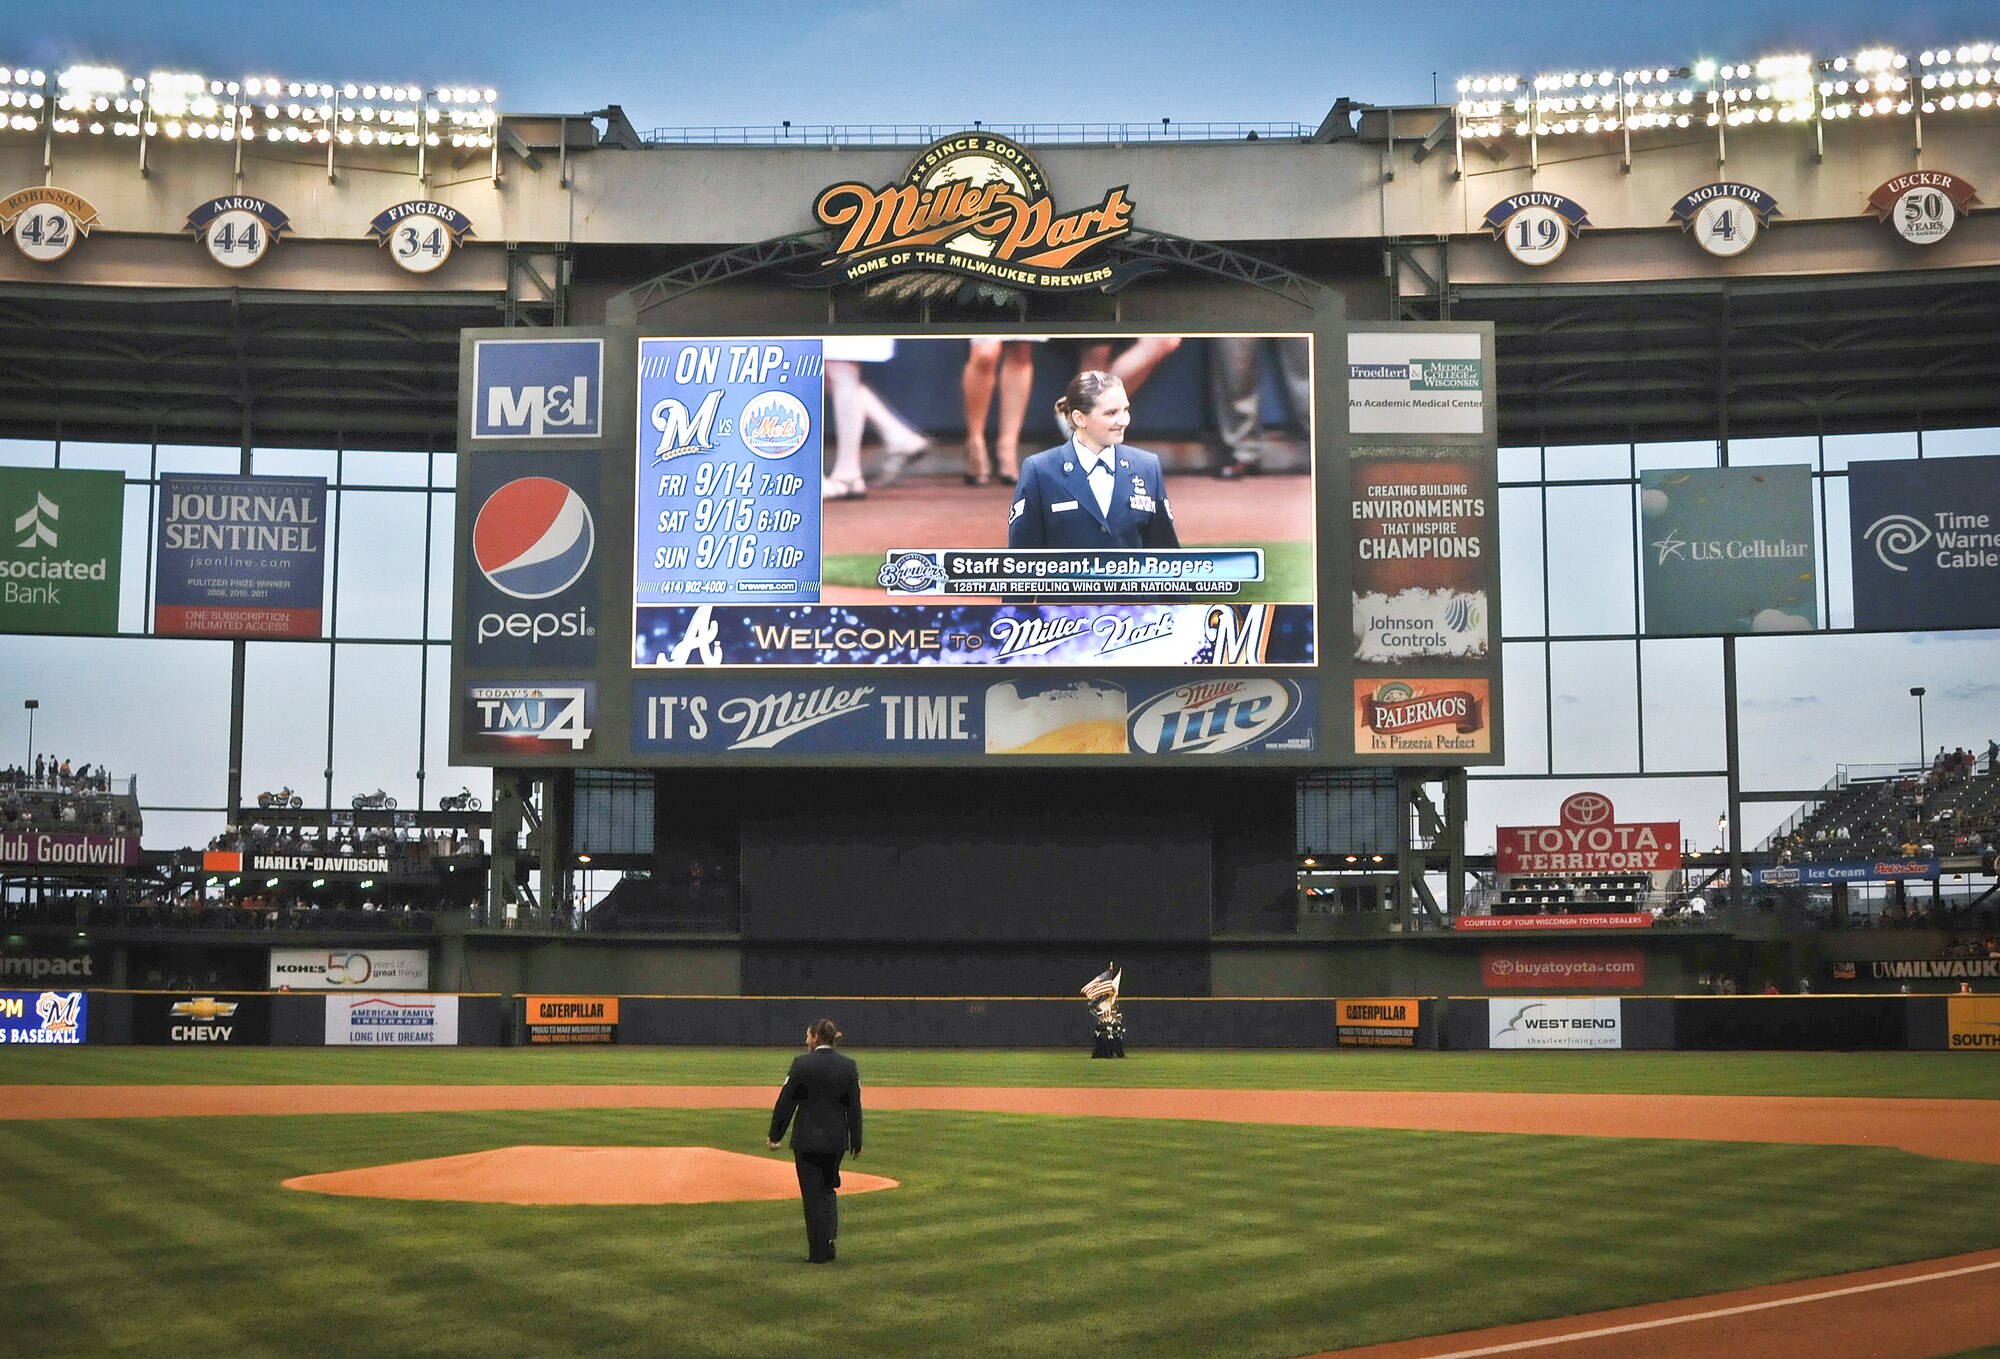 Rogers strides towards the pitcher’s mound at Miller Park in Milwaukee as her image is projected on the big screen Wed., Sept. 12, 2012. 
Rogers, a Financial Management Specialist at the 128th Air Refueling Wing, was selected to throw out the ceremonial first pitch in recognition of her recent deployment. (Air National Guard Photo by Staff Sgt. Jeremy M. Wilson / Released)
